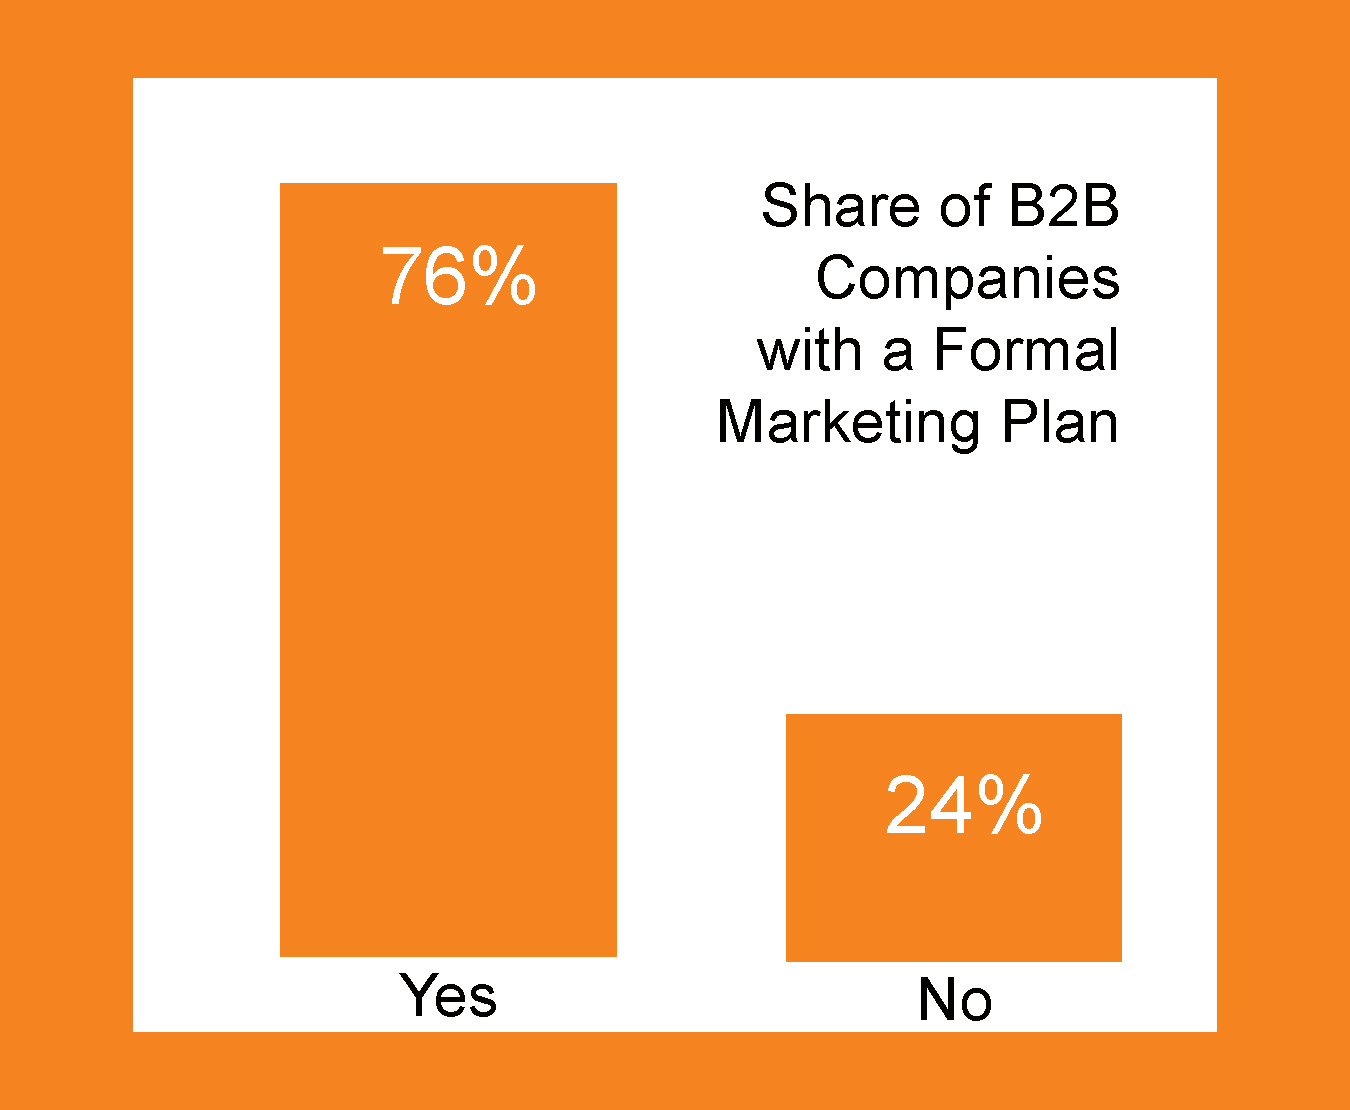 Evolution of B2B Sales requires marketing plans and strategies. 76% of B2B companies have a formal marketing plan